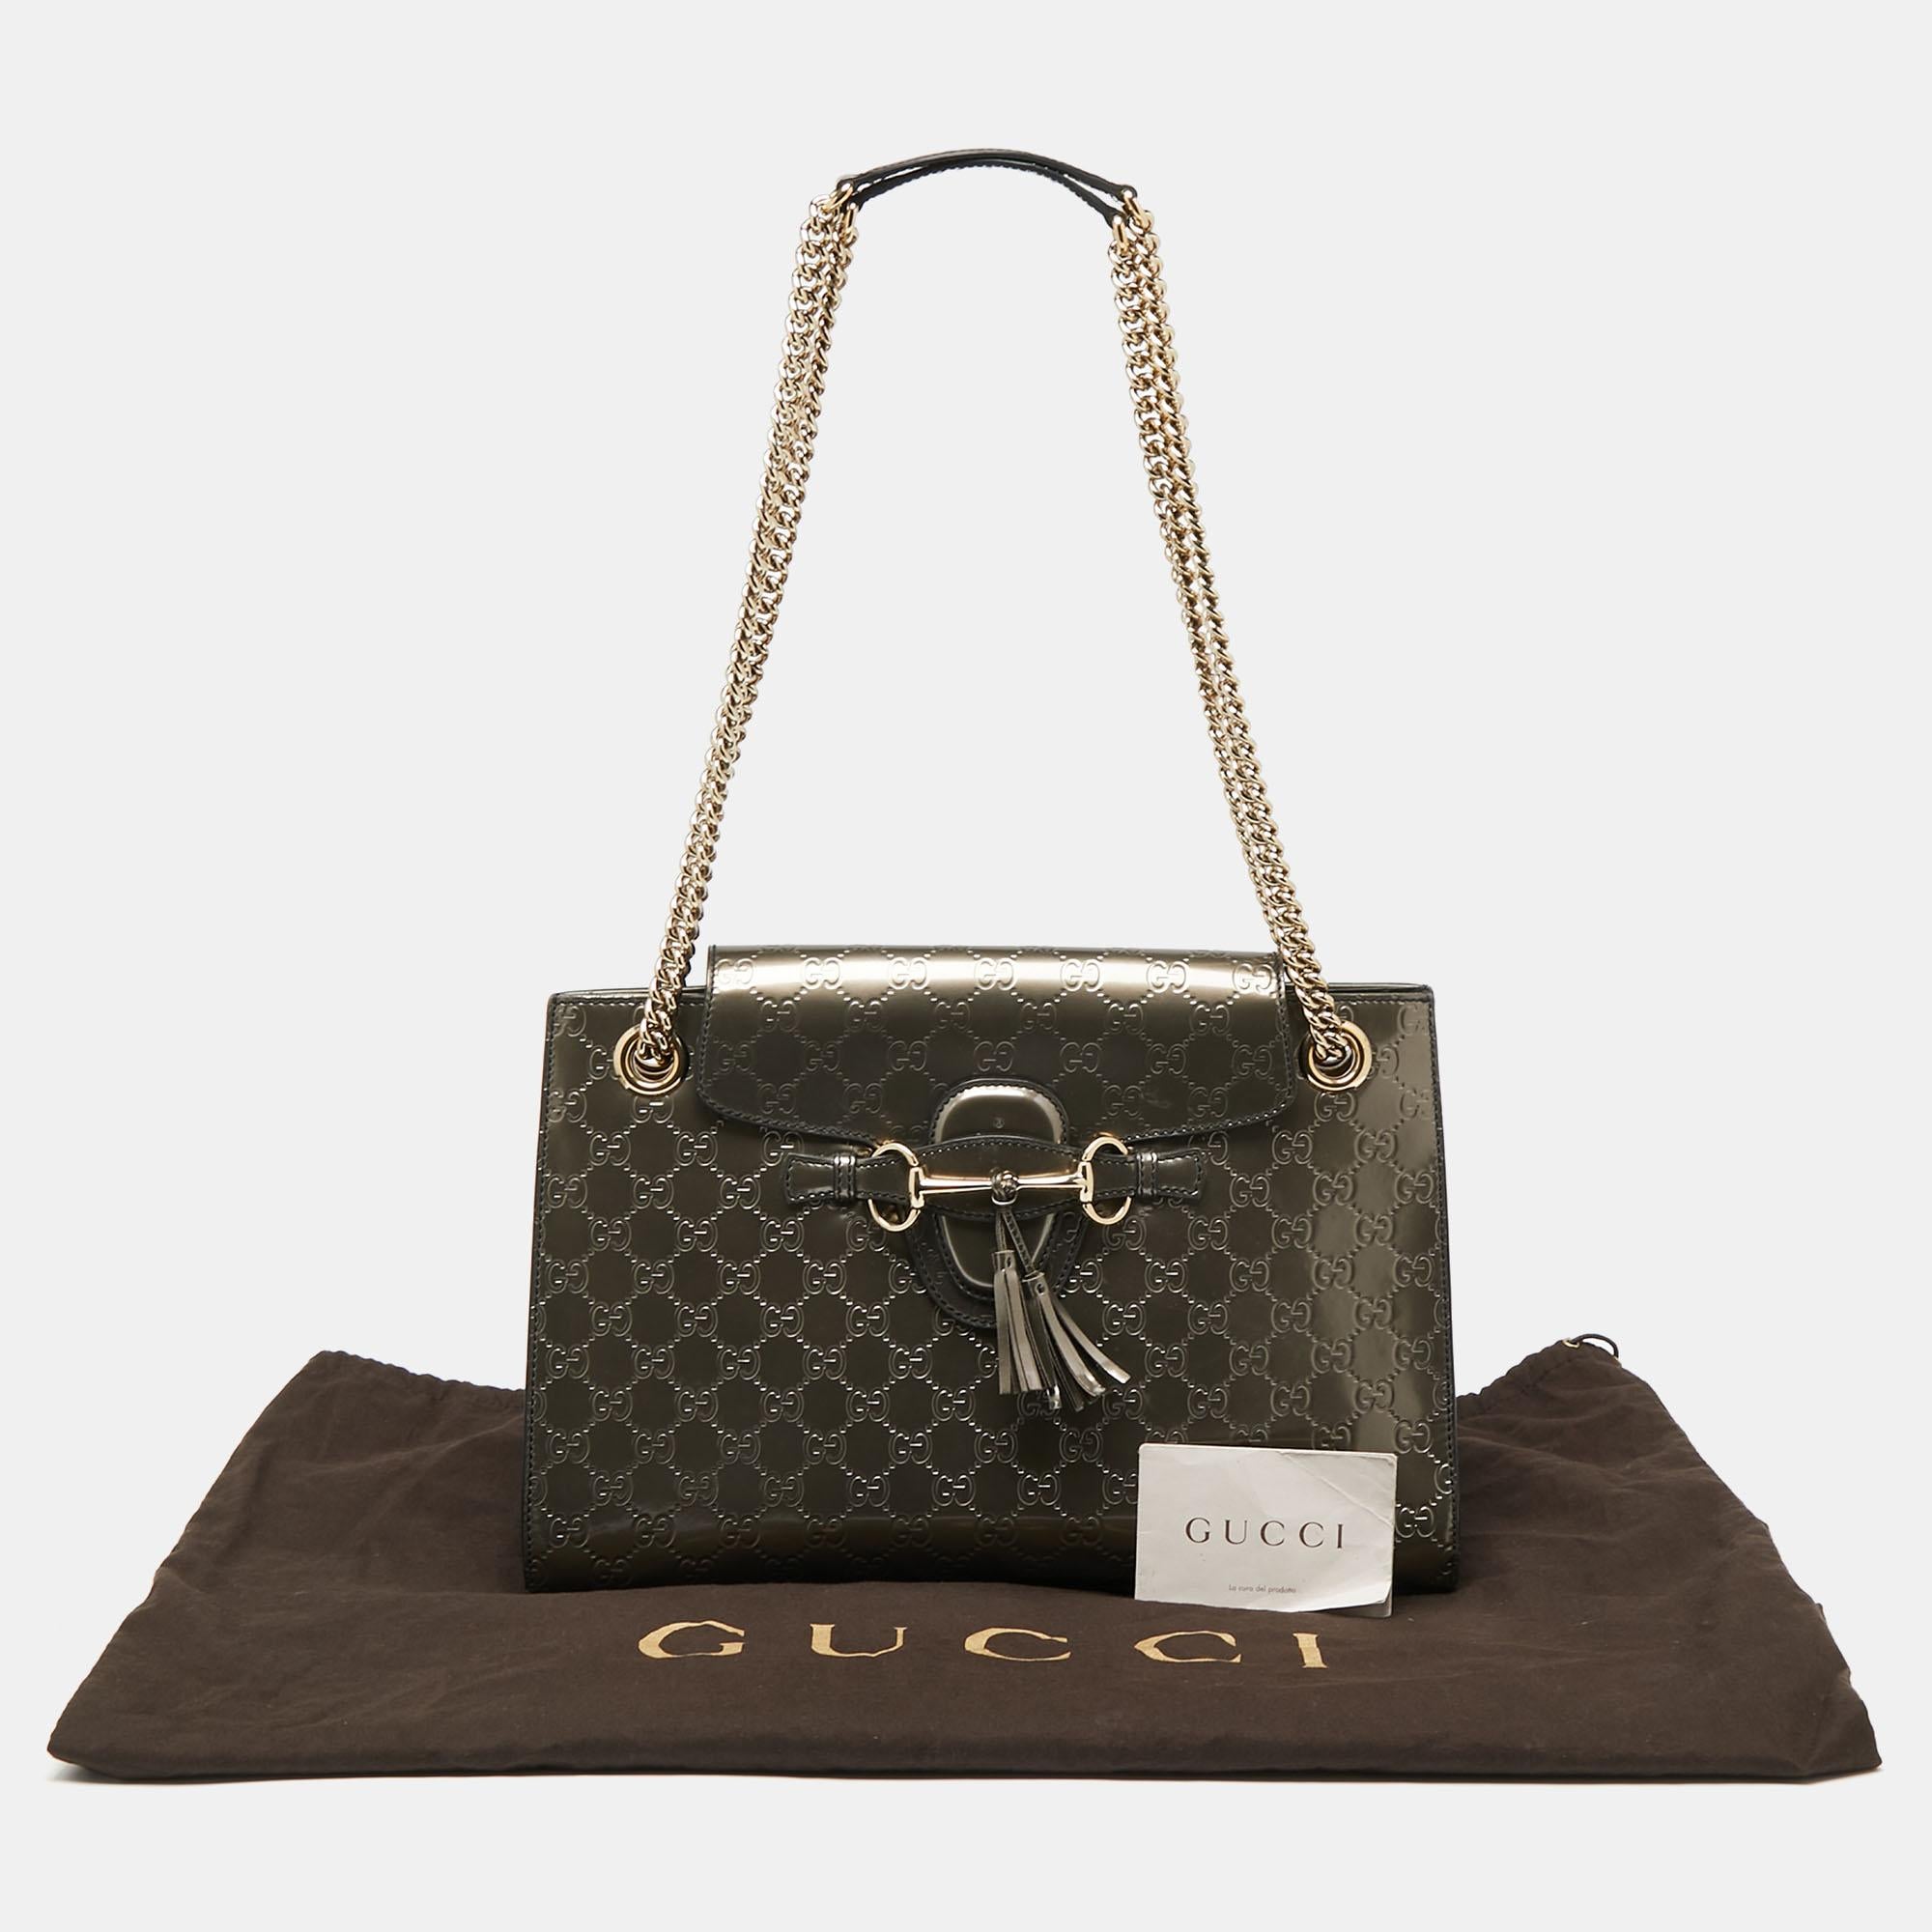 Gucci Metallic Grey Guccissima Patent Leather Large Emily Chain Shoulder Bag 7